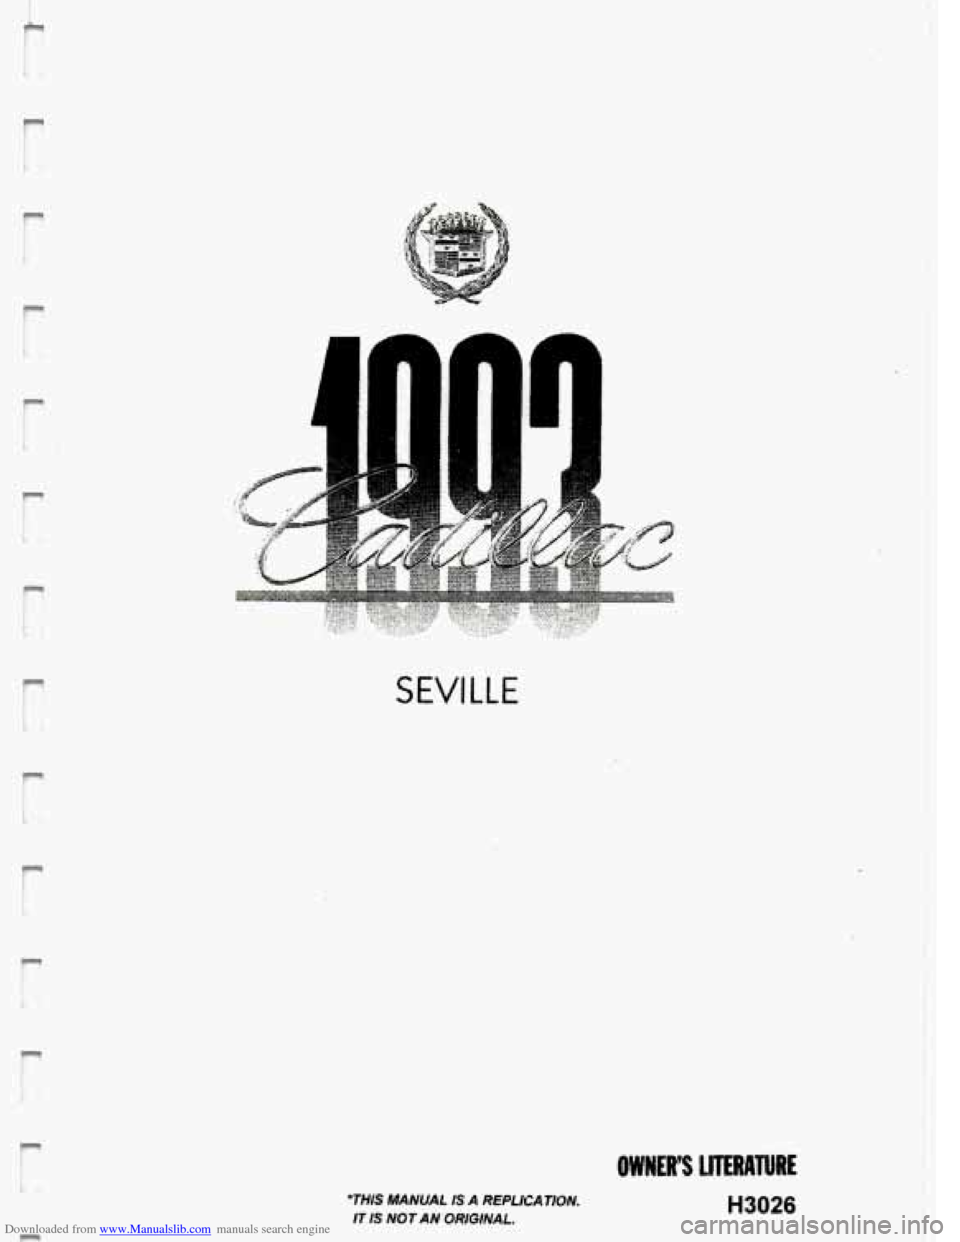 CADILLAC SEVILLE 1993 4.G Owners Manual Downloaded from www.Manualslib.com manuals search engine 1 1. 
n 
SEVILLE 
THIS MANUAL IS A REPLICATION. 
IT IS NOT  AN ORIGINAL. 
OWWES LITERATURE 
H3026   